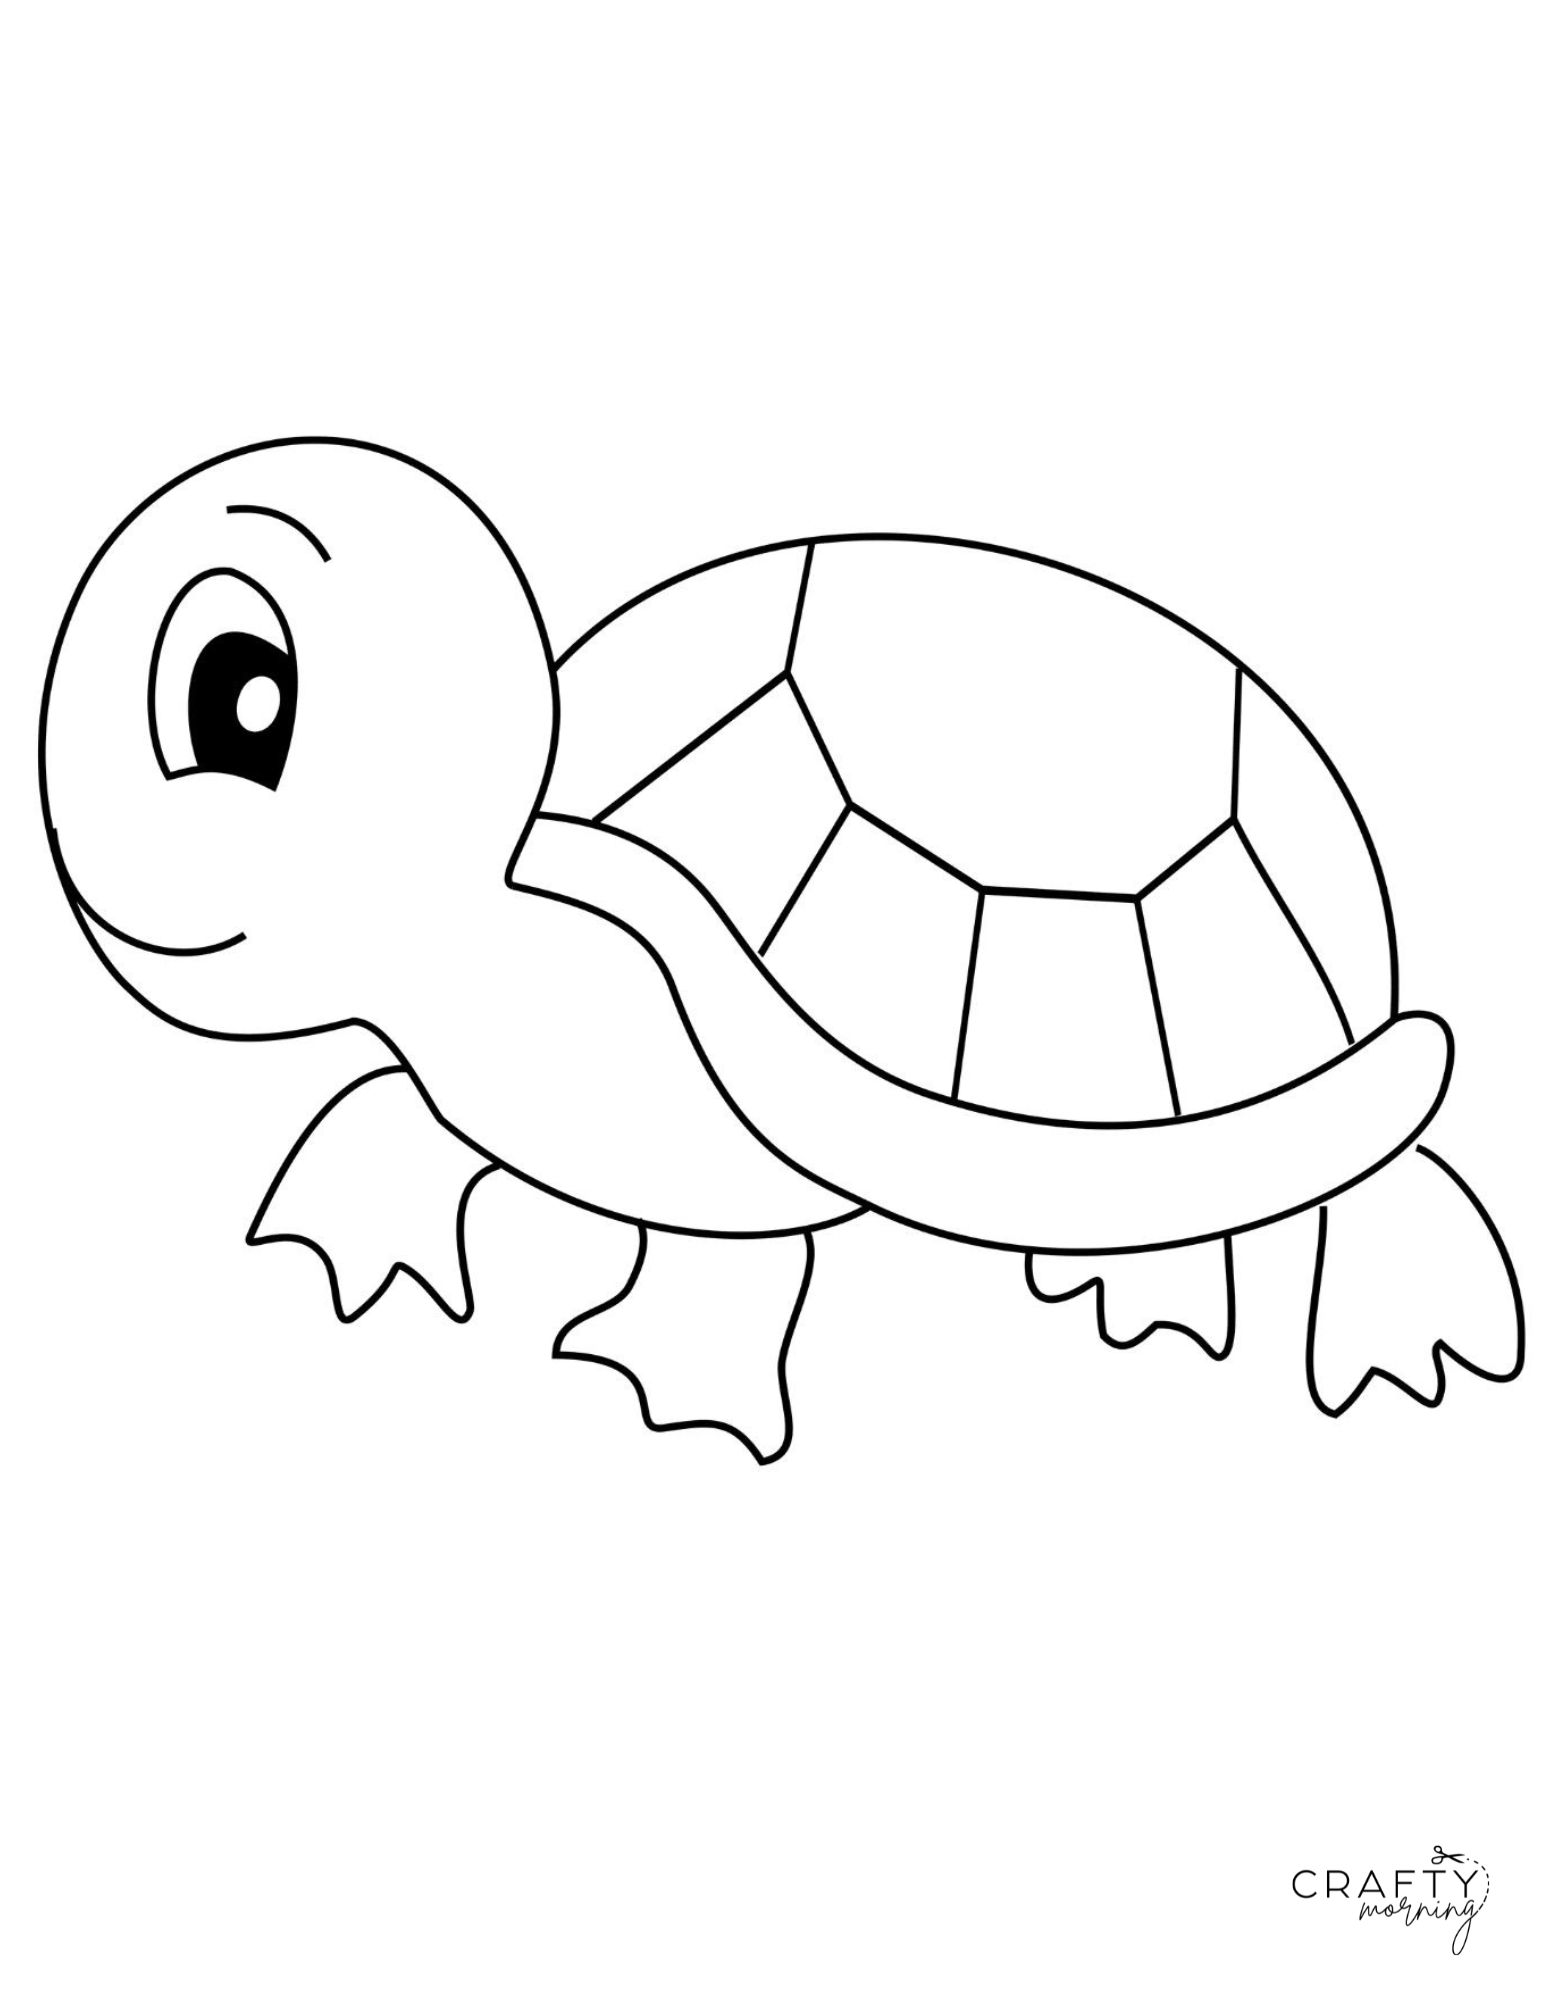 How to Draw a Realistic Tortoise